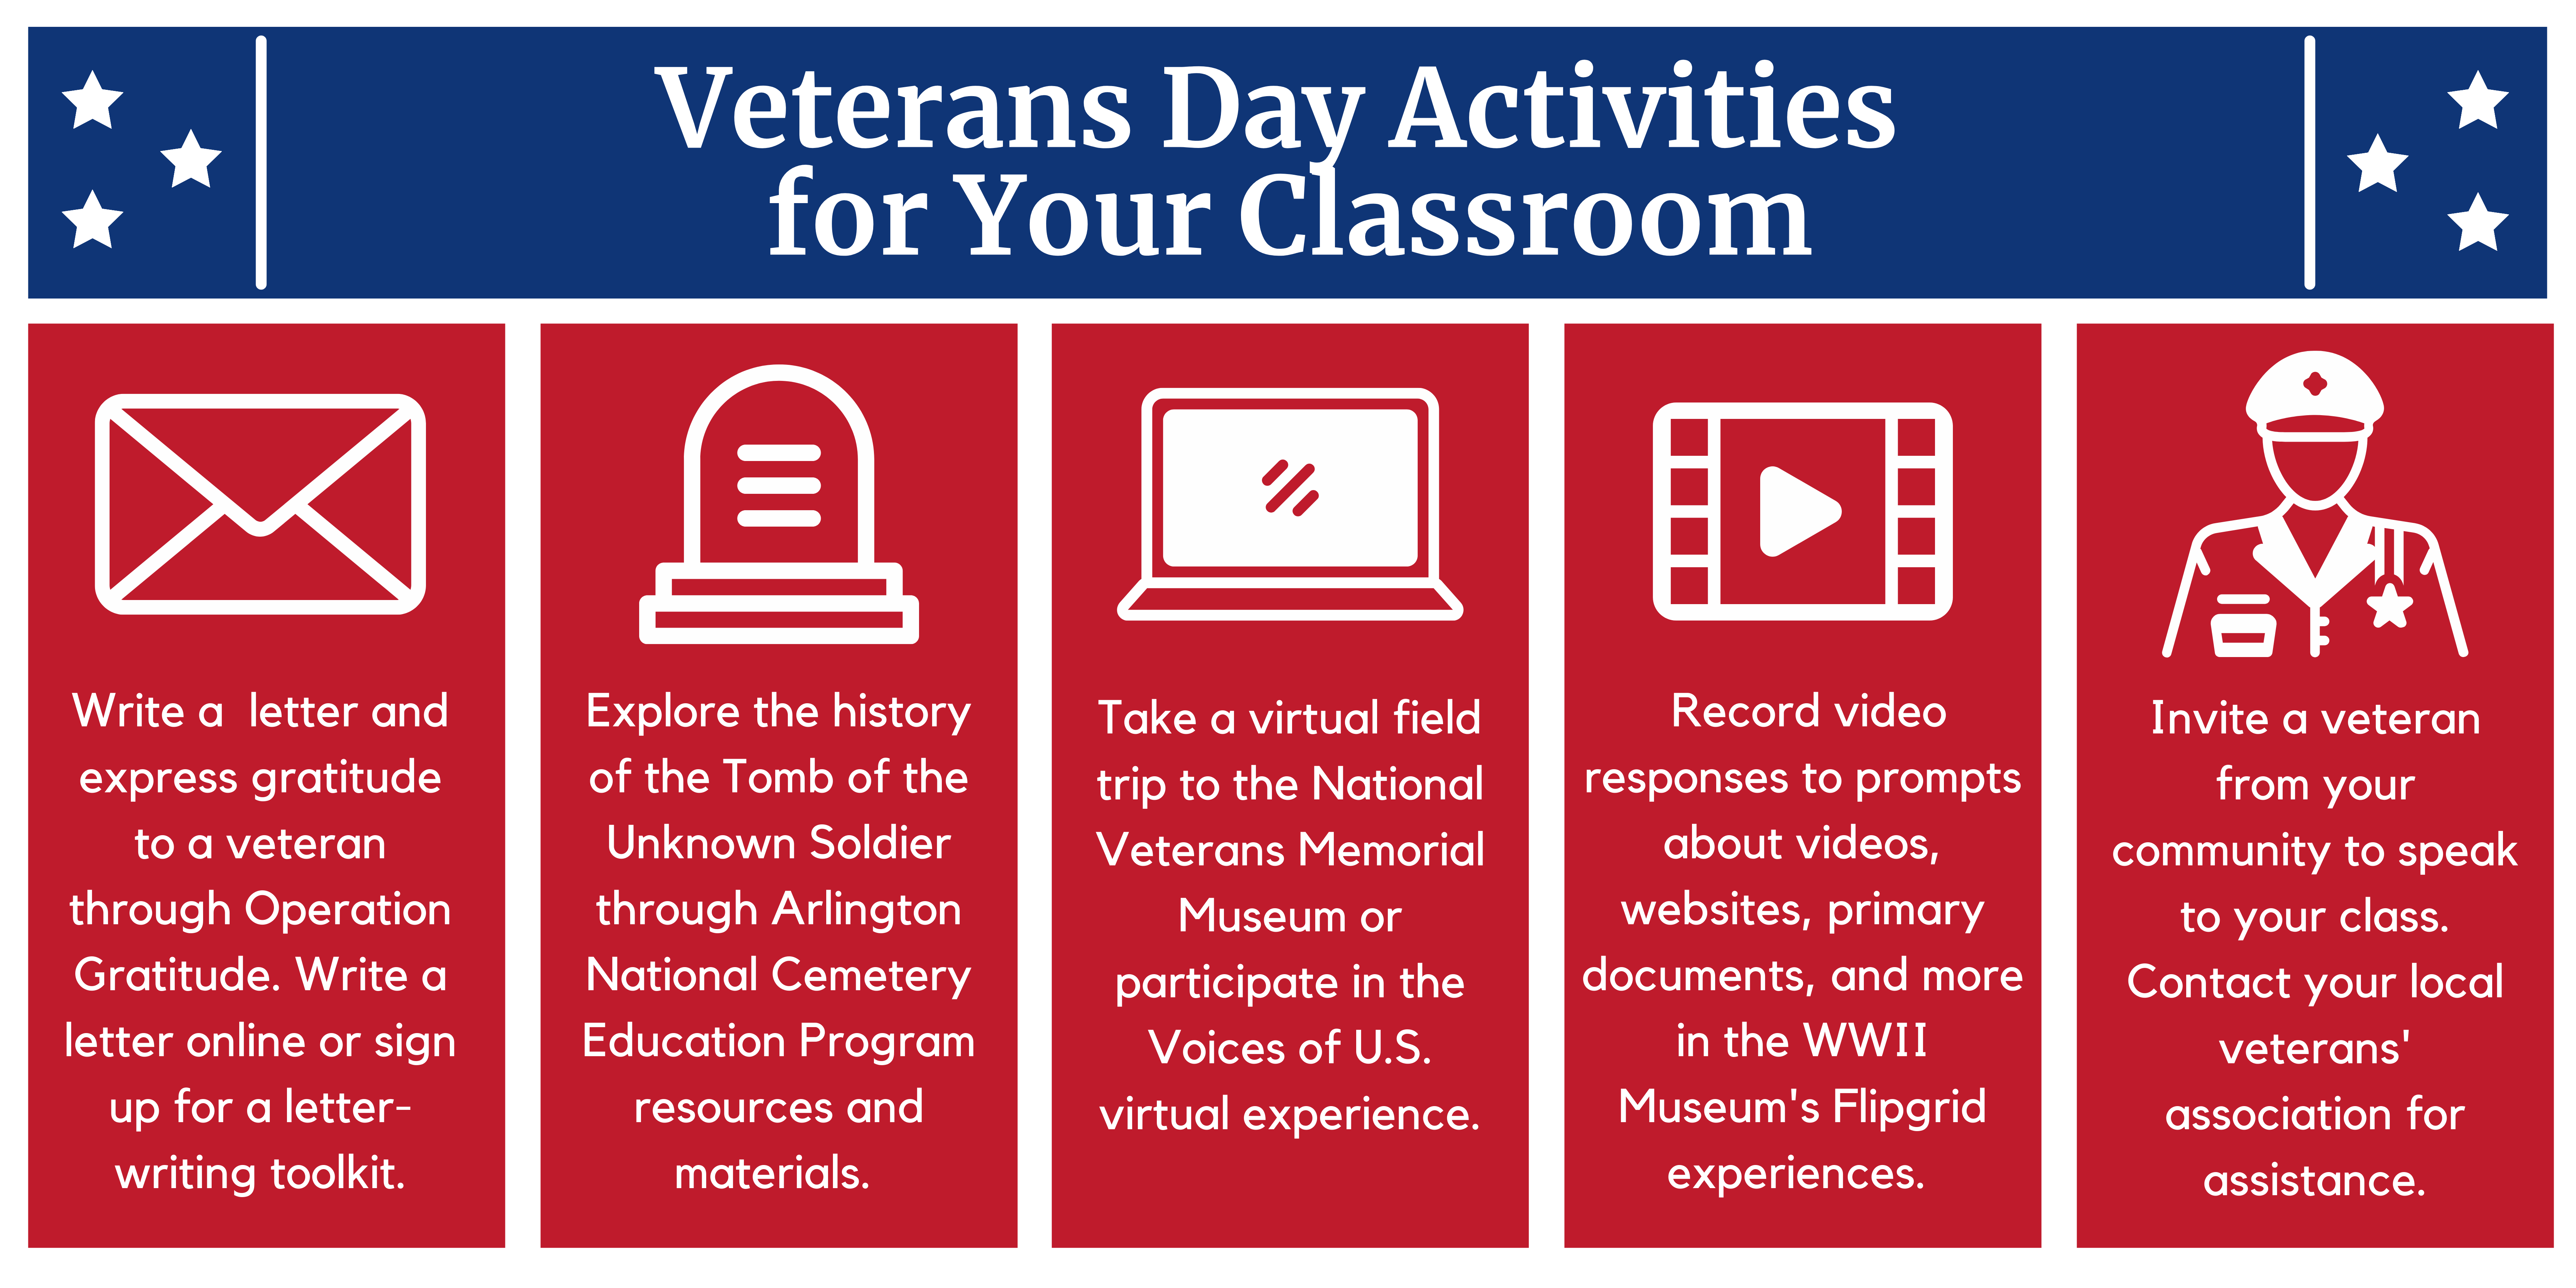 Five Veterans Day Activities for Your Classroom • TechNotes Blog